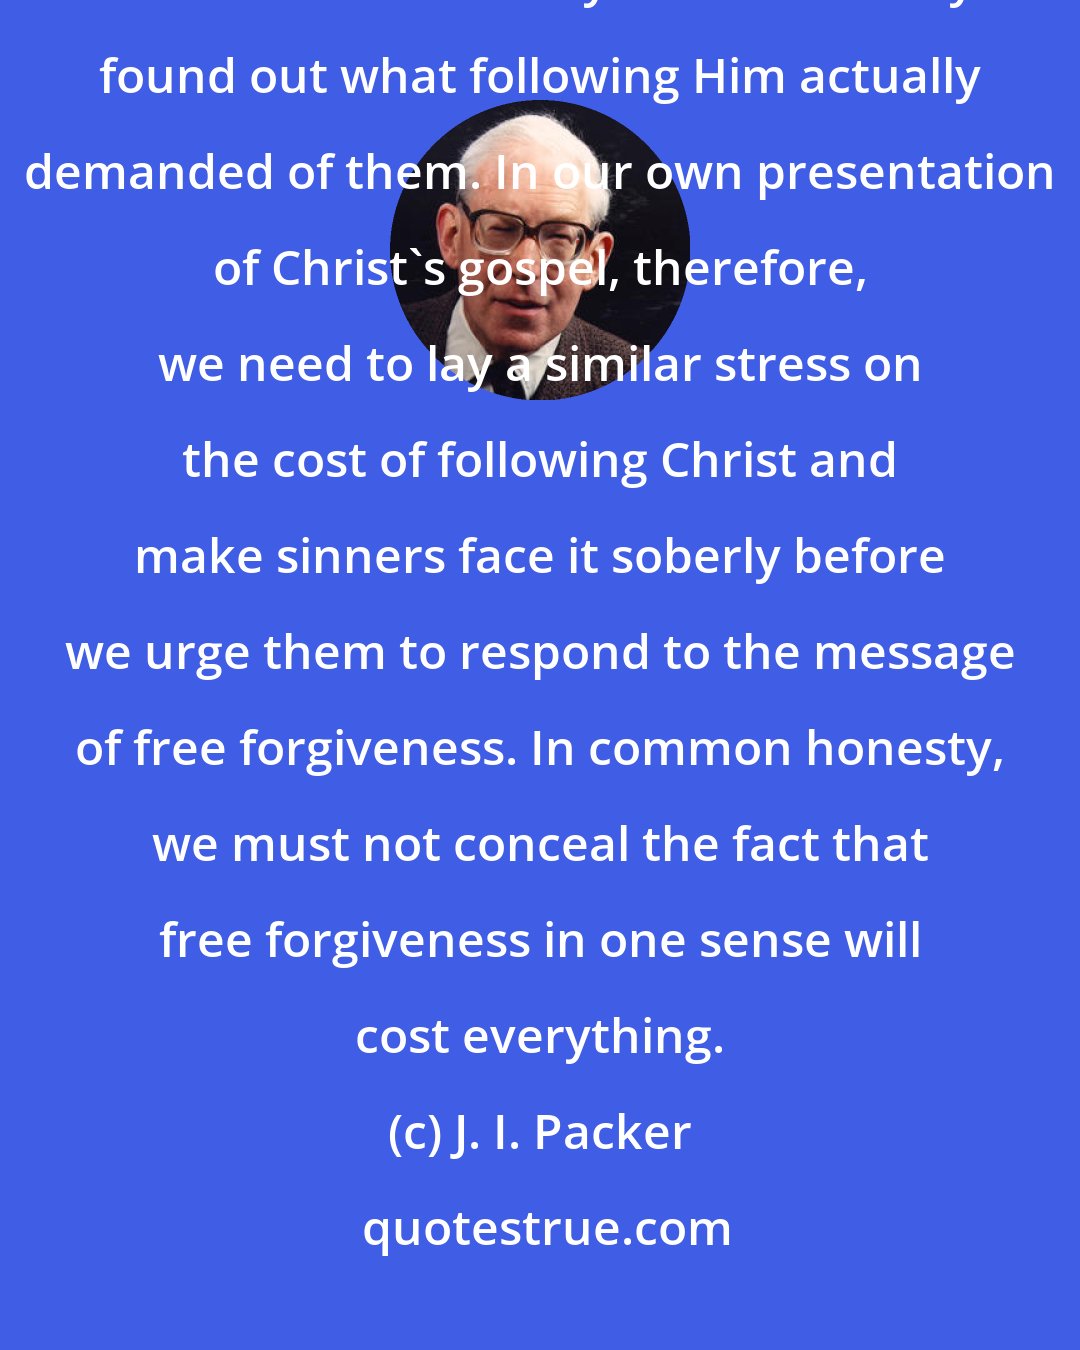 J. I. Packer: Christ had no interest in gathering vast crowds of professed adherents who would melt away as soon as they found out what following Him actually demanded of them. In our own presentation of Christ's gospel, therefore, we need to lay a similar stress on the cost of following Christ and make sinners face it soberly before we urge them to respond to the message of free forgiveness. In common honesty, we must not conceal the fact that free forgiveness in one sense will cost everything.